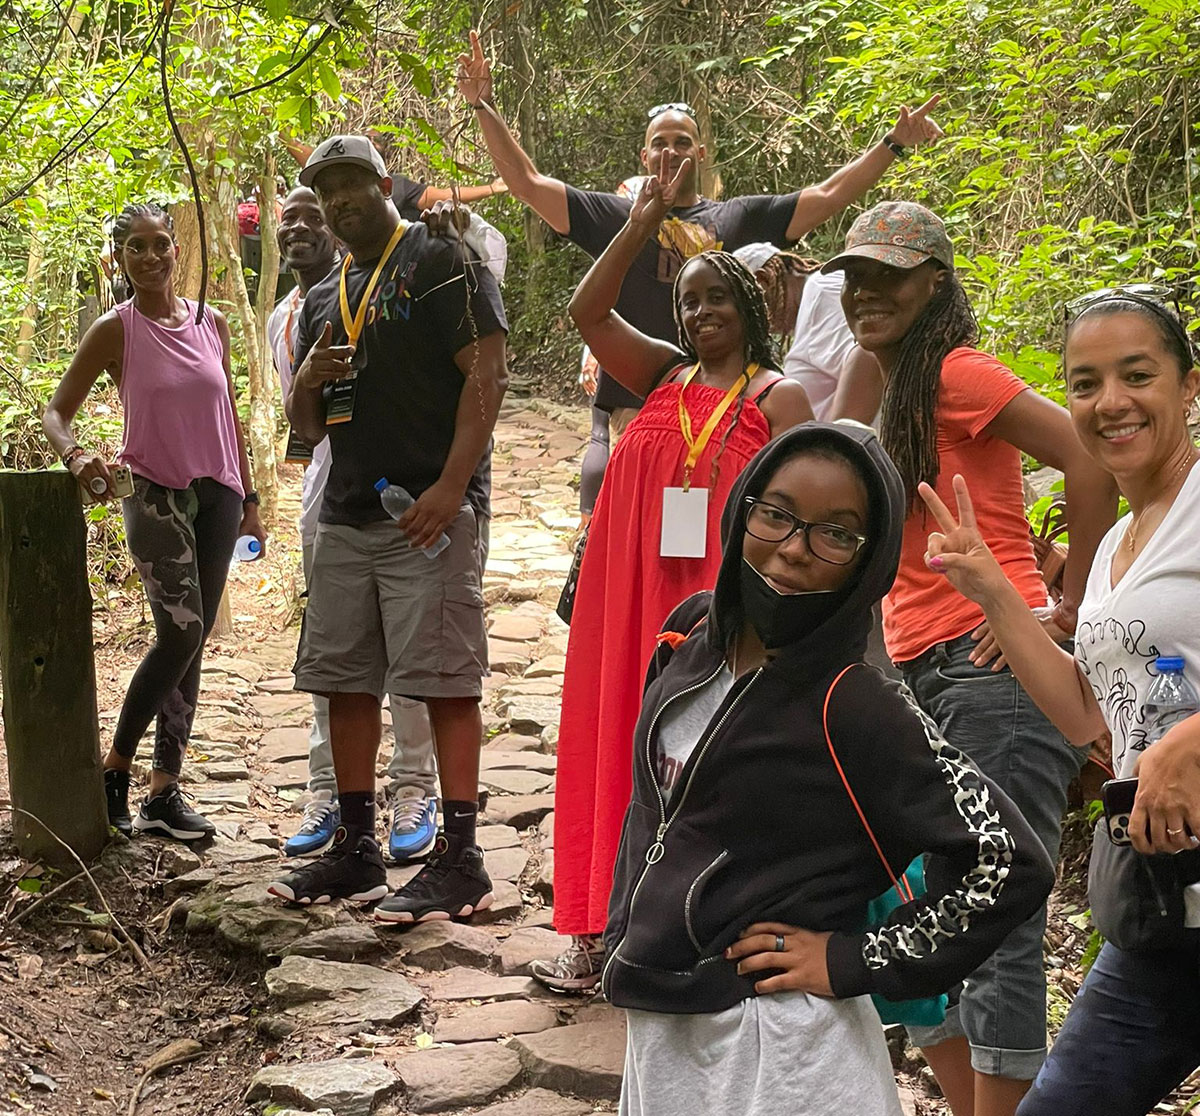 City College students pose for a group photo on a hiking trail in Ghana